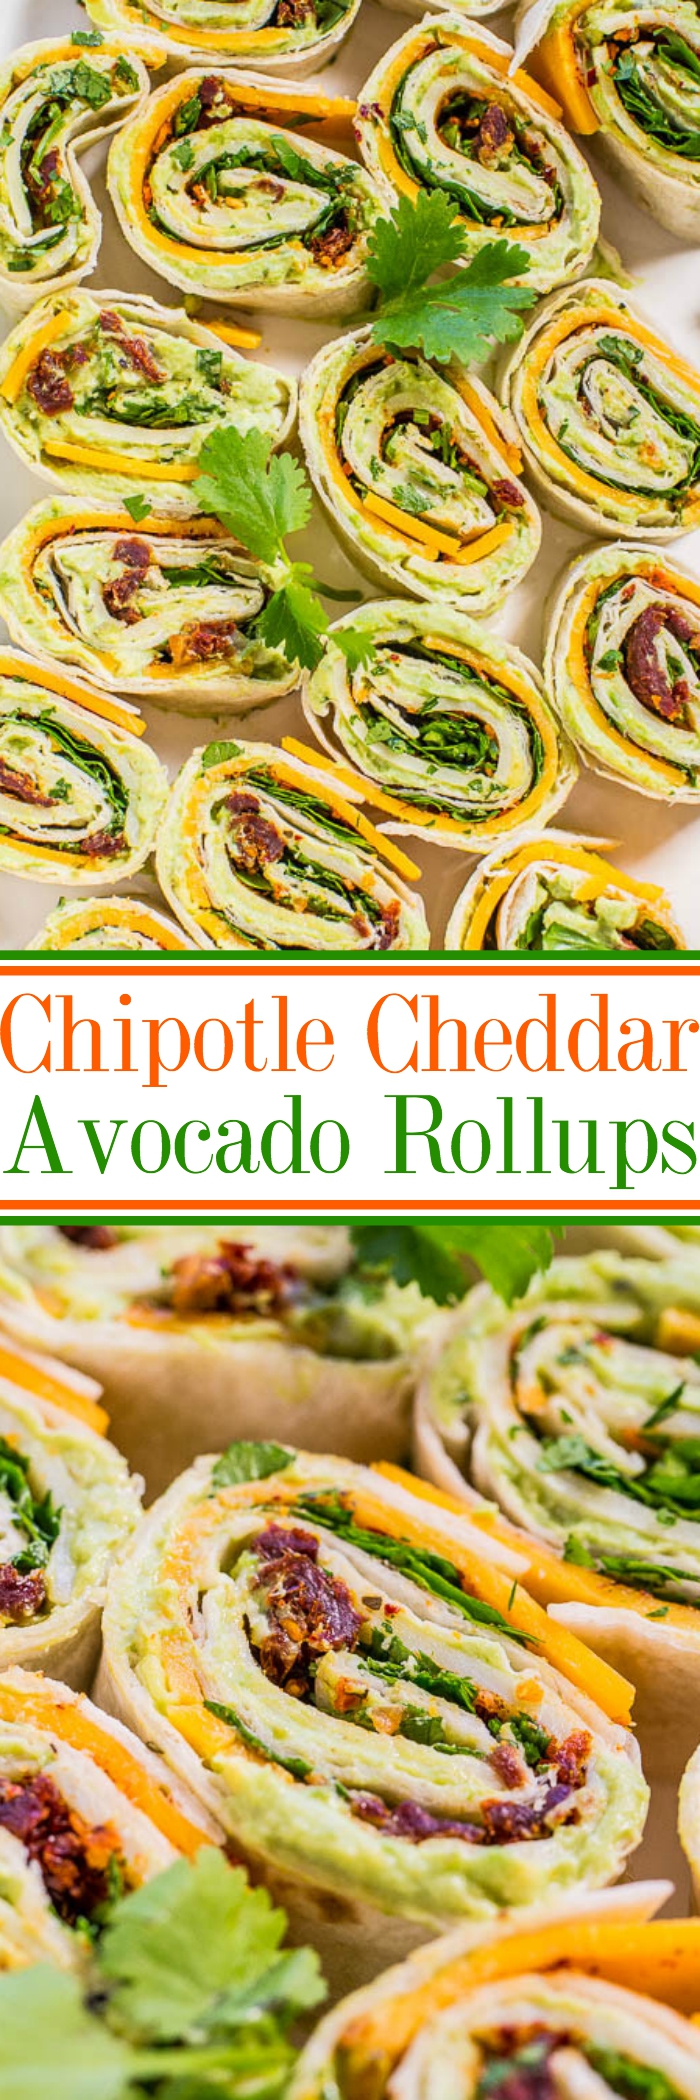 Chipotle Cheddar Avocado Tortilla Pinwheels — Creamy avocado with sharp cheddar, cilantro, and a little bit of smoky chipotle heat! Easy, ready in 5 minutes, and everyone loves these! Great appetizer and a gameday party favorite!!